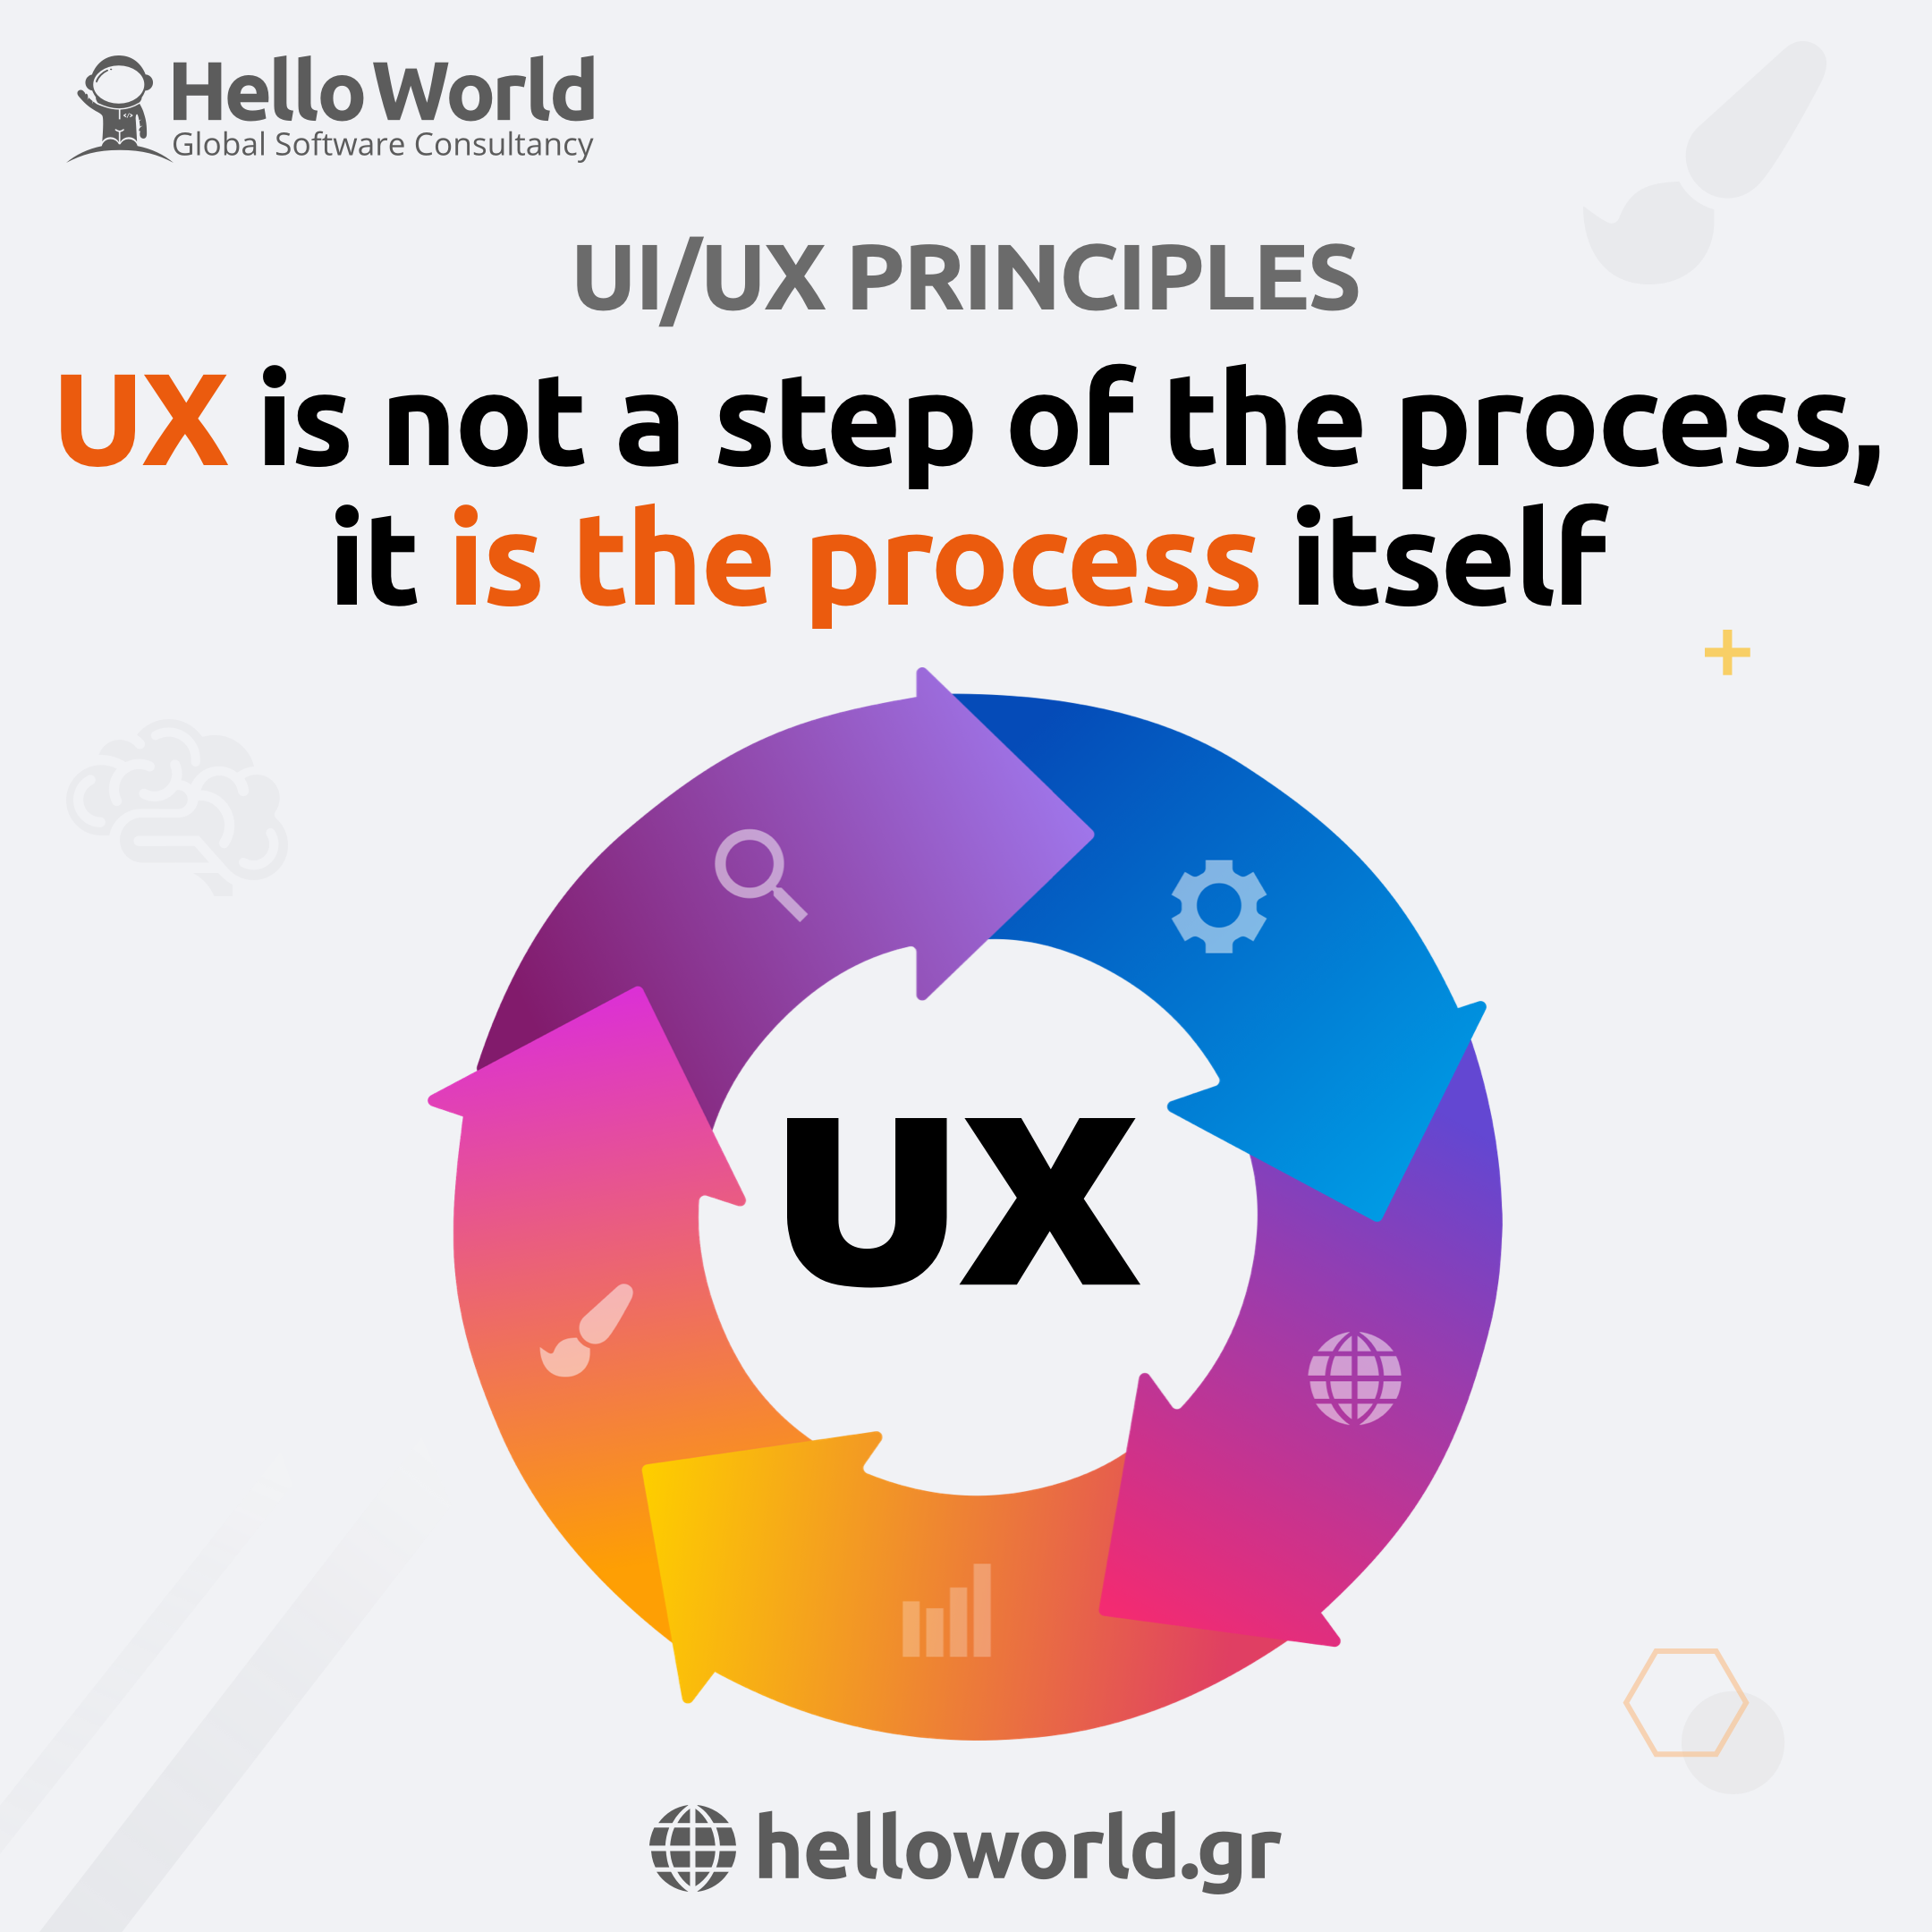 UX is not a step of the process, it is the process itself